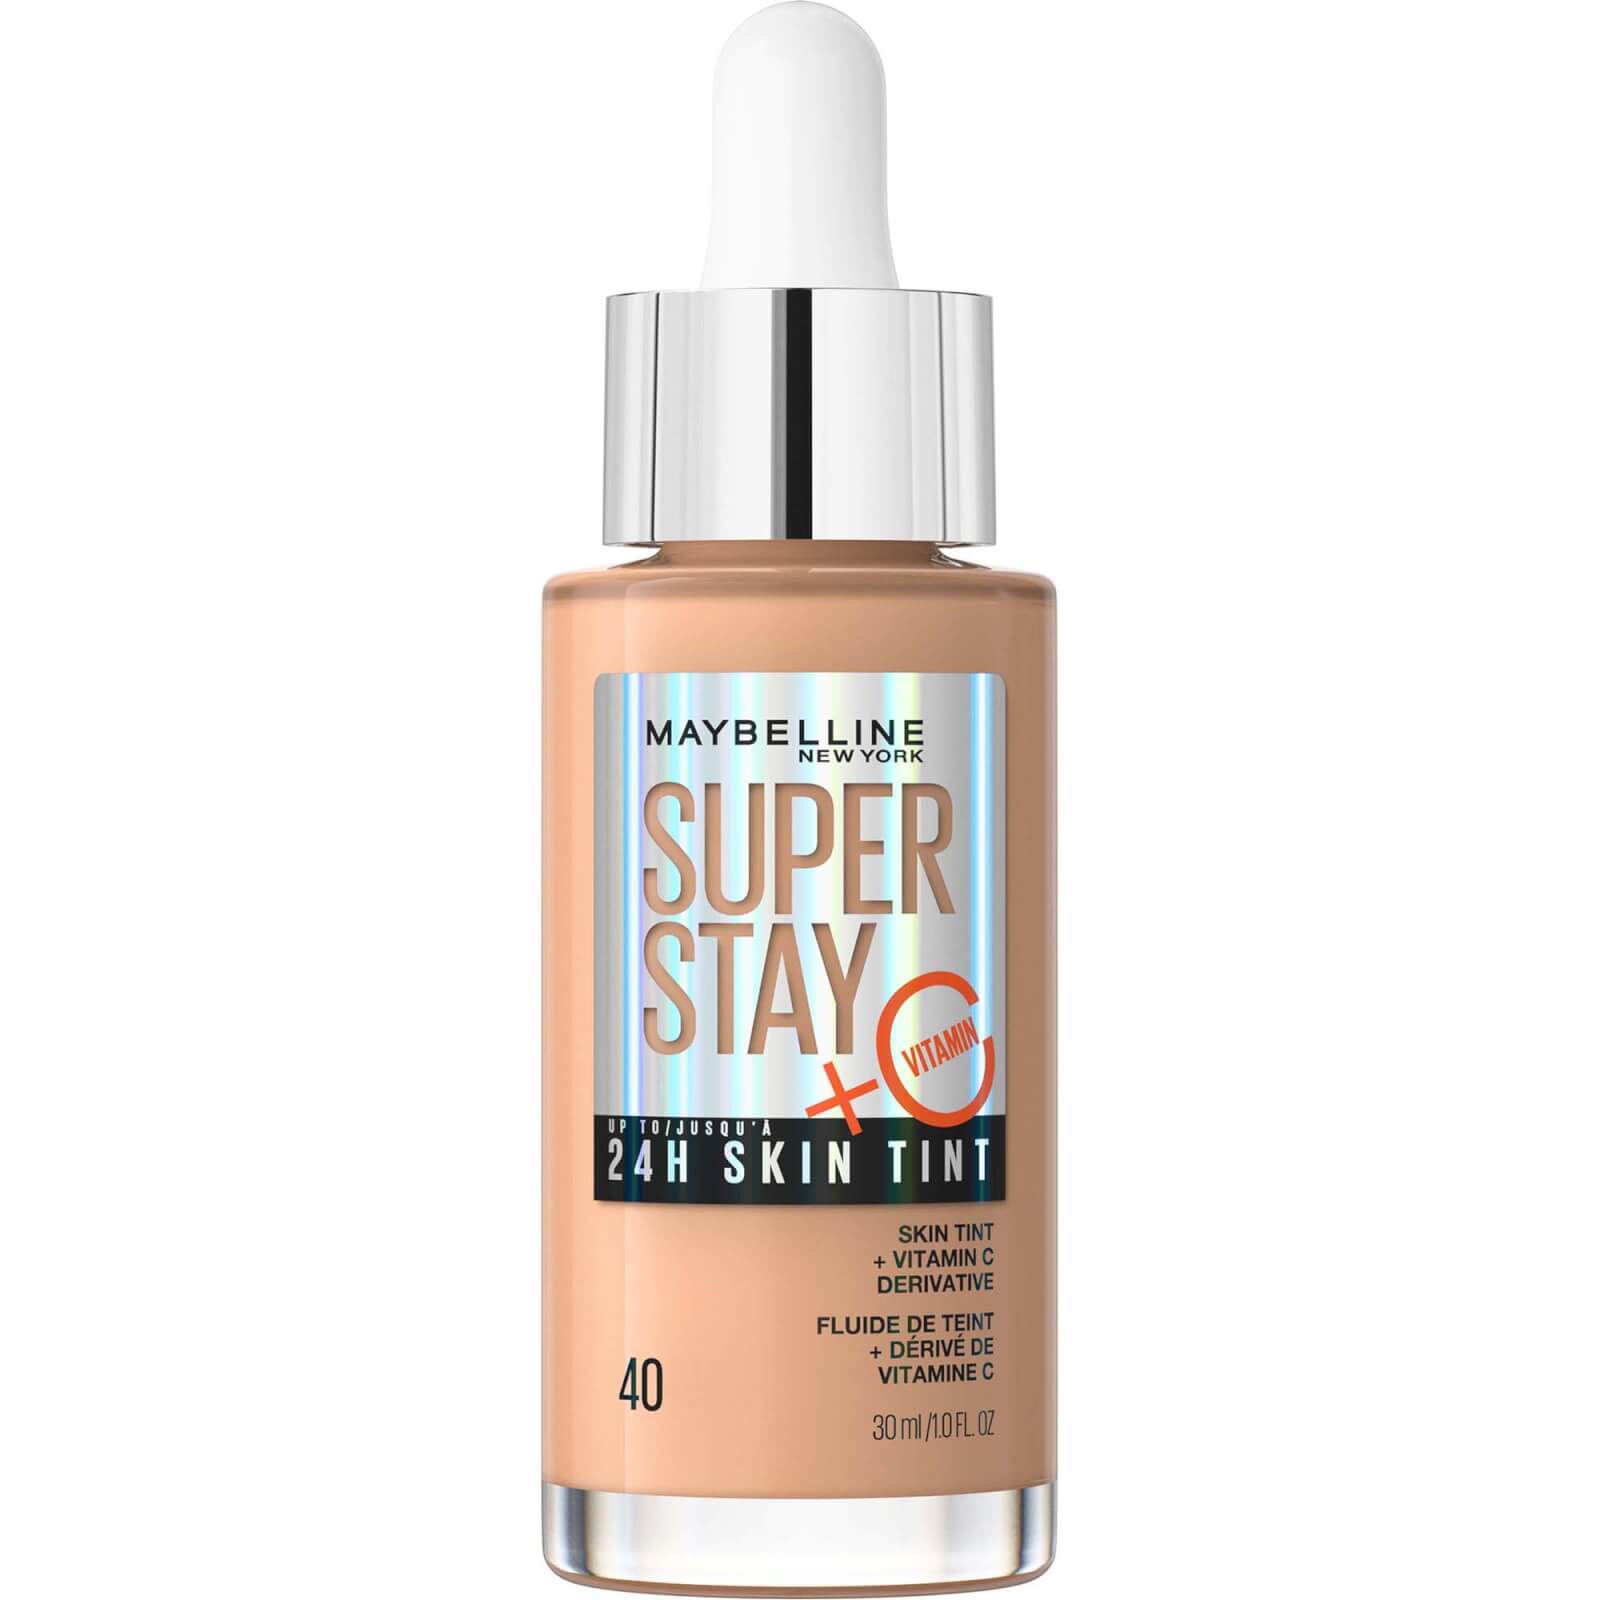 Maybelline Super Stay Up To 24h Skin Tint Foundation + Vitamin C 30ml (various Shades) - 40 In Neutral